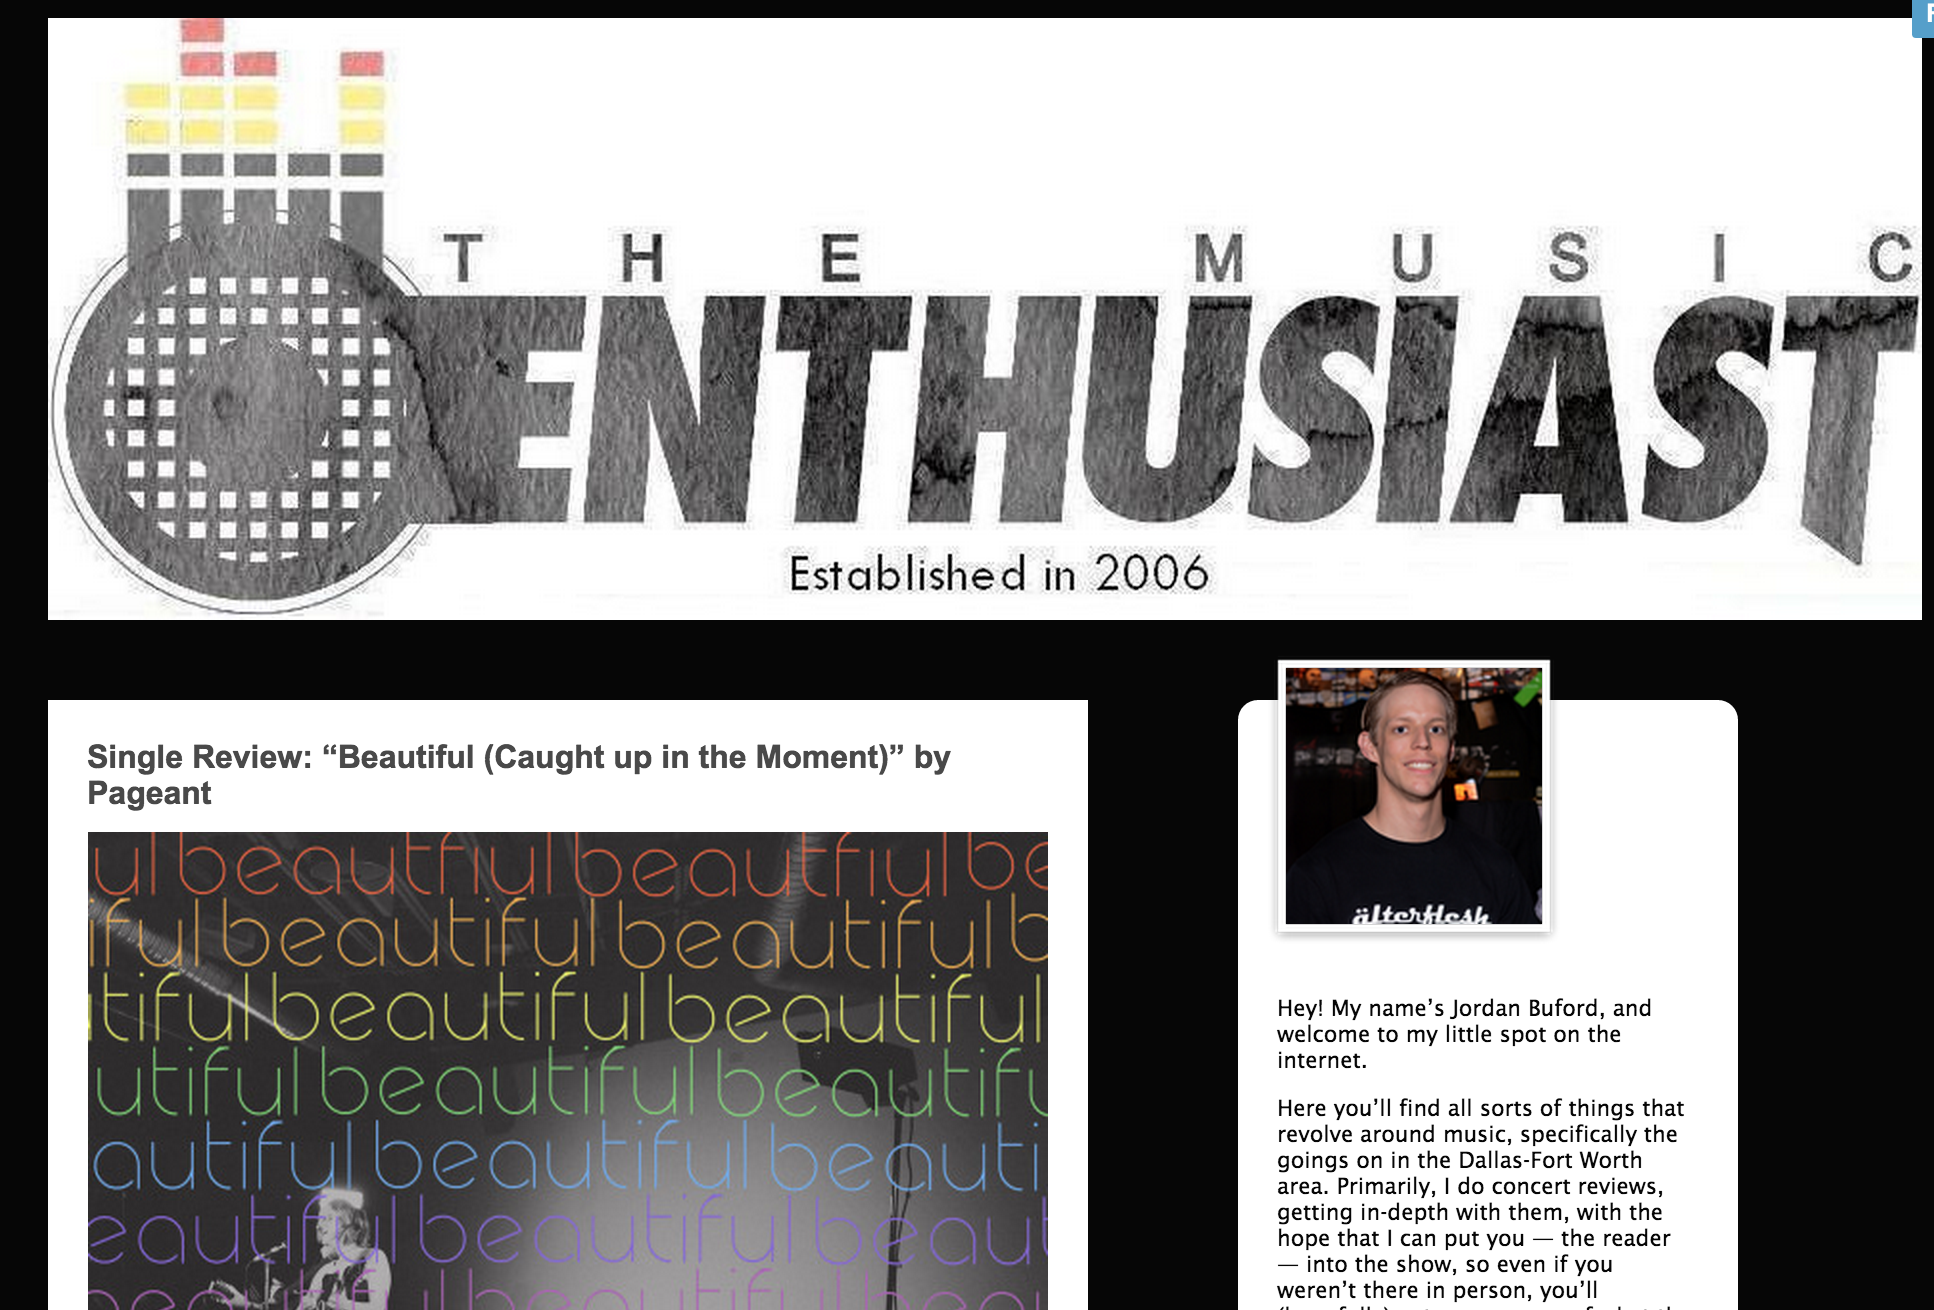 The Music Enthusiast "Single Review: “Beautiful (Caught up in the Moment)” by Pageant" Oct 7, 2015